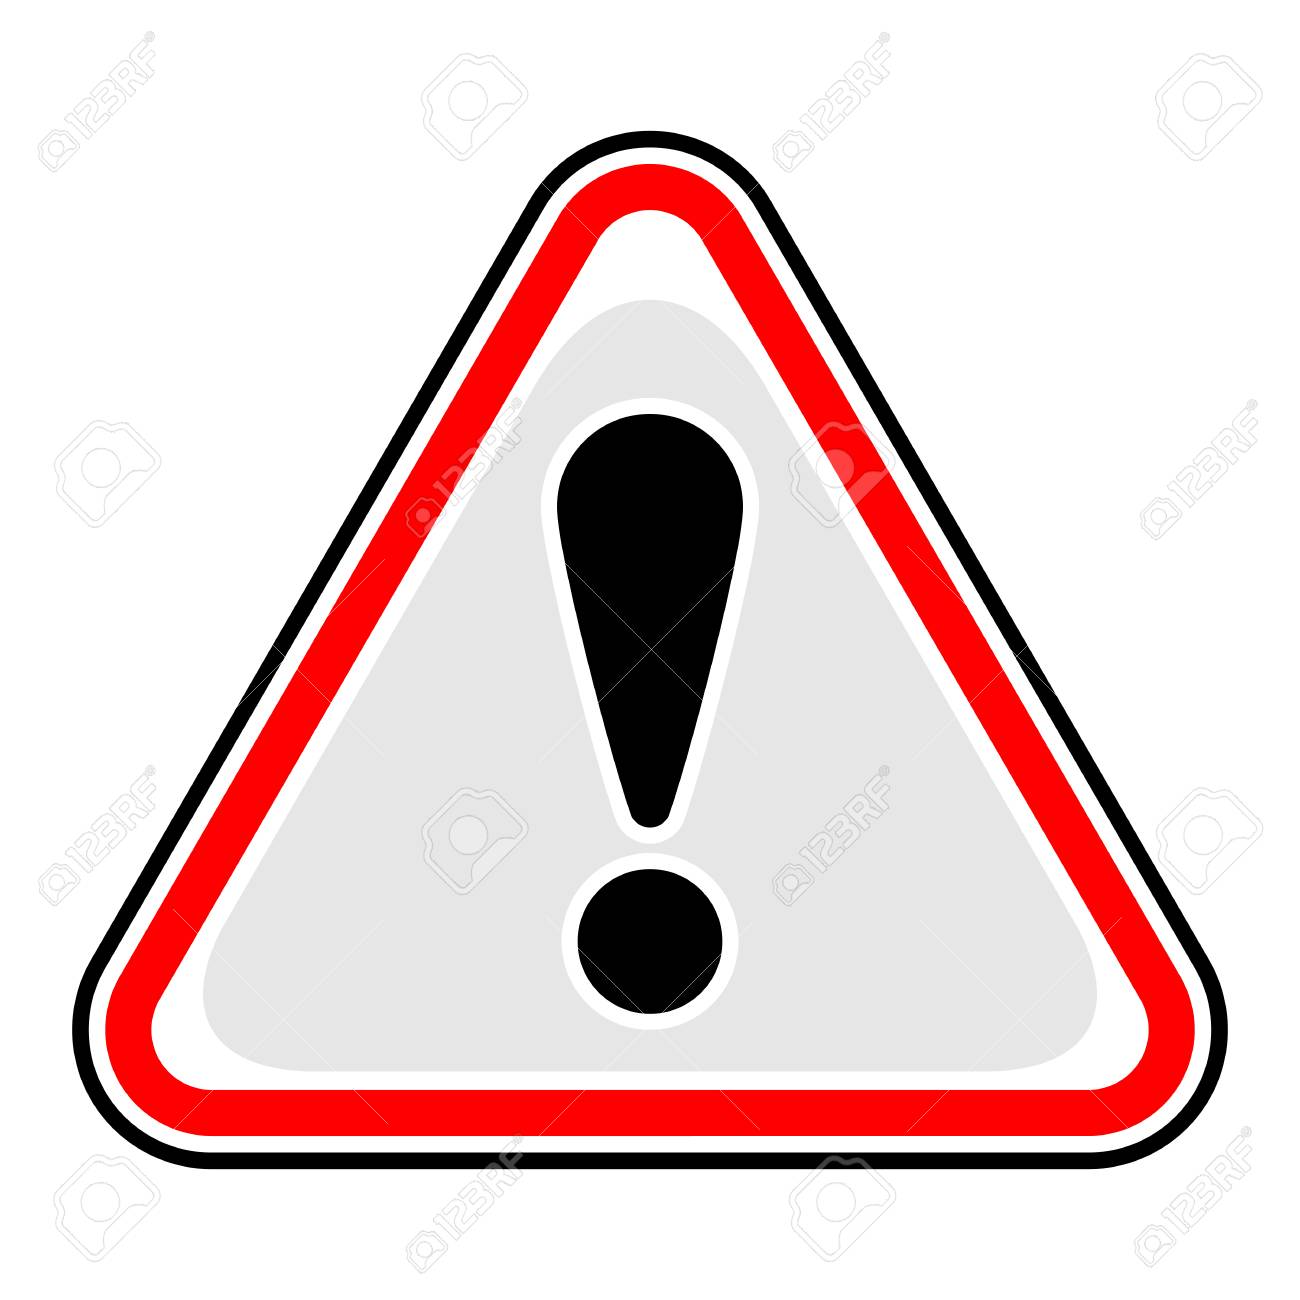 Alert, attention, flag, mark, red, warning icon | Icon search engine